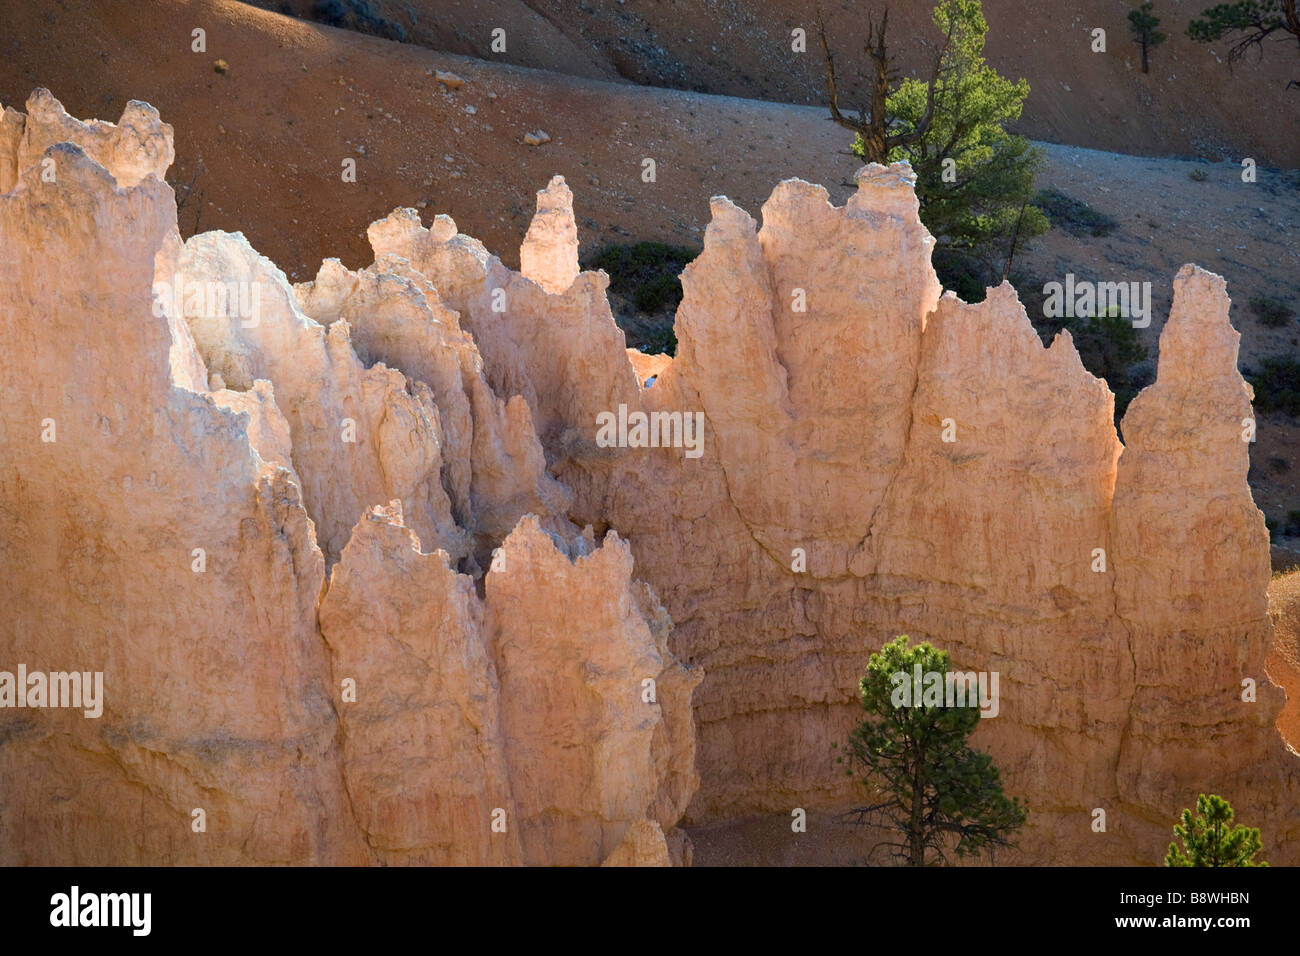 View of Bryce Amphitheater from the Rim Trail in Bryce Canyon National Park Utah Stock Photo